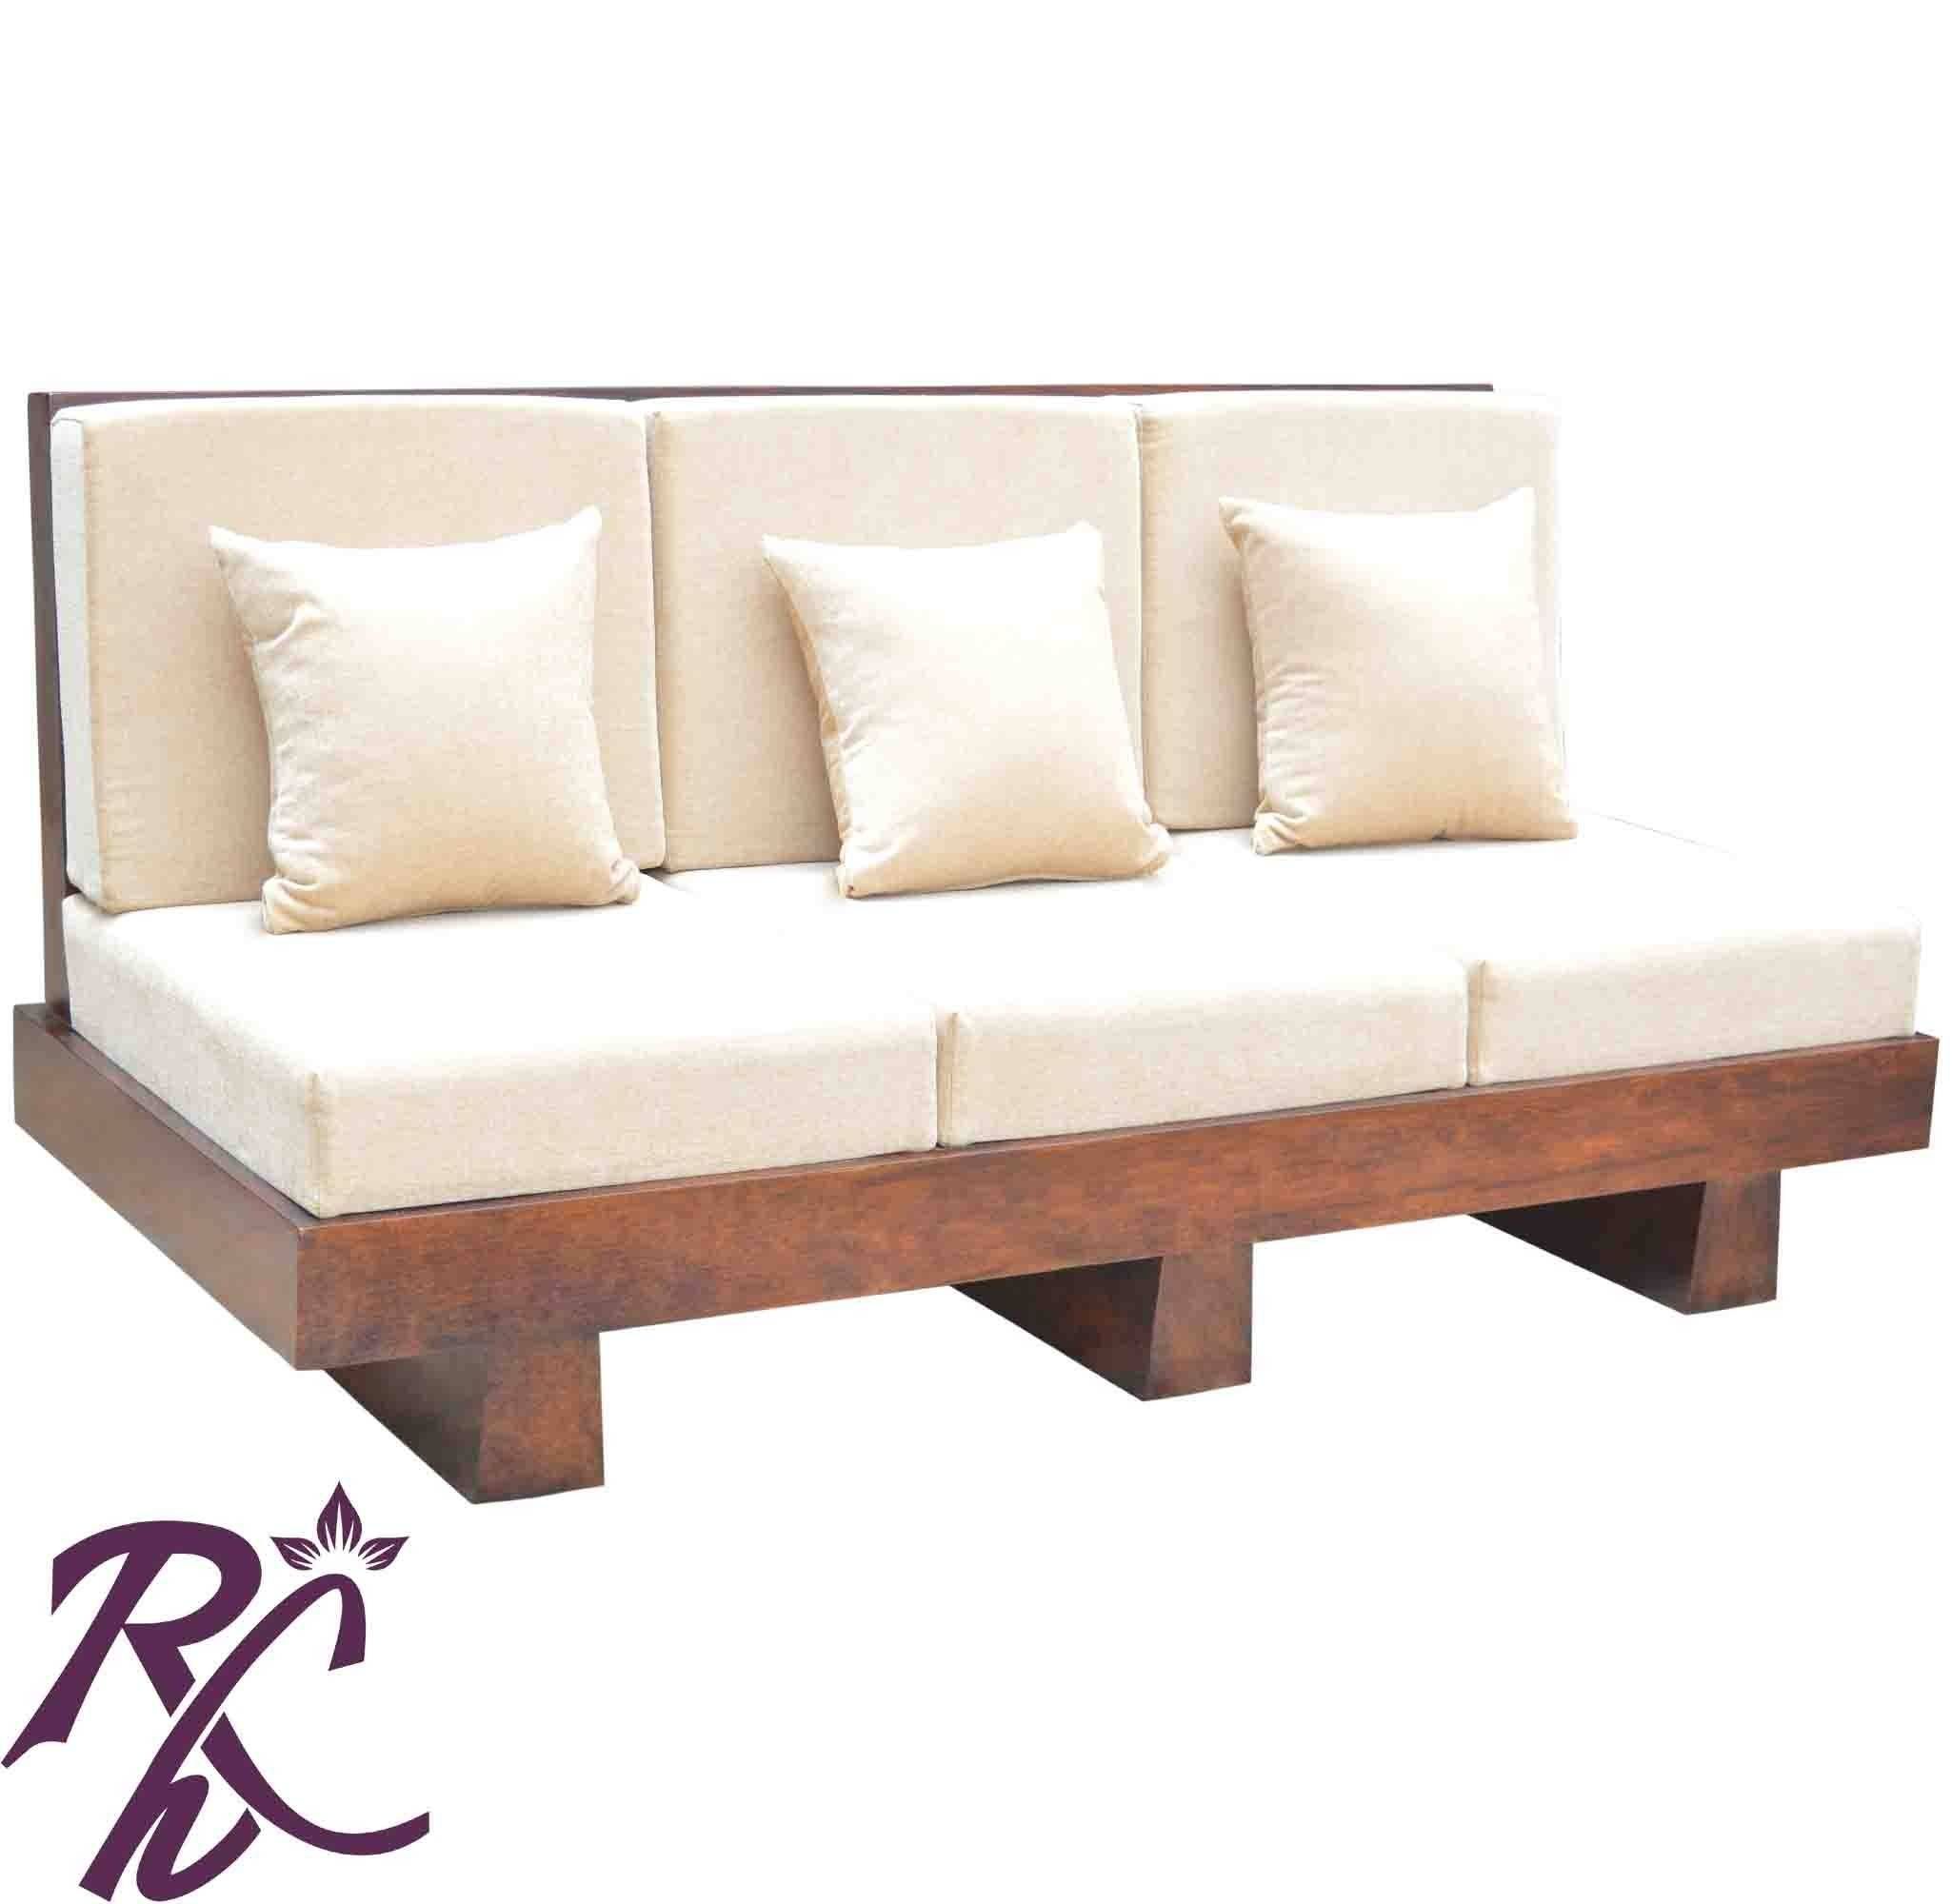 Buy Low Height Solid Wood Sofa Online In India  Rajhandicraft Inside Low Height Sofas (View 10 of 15)